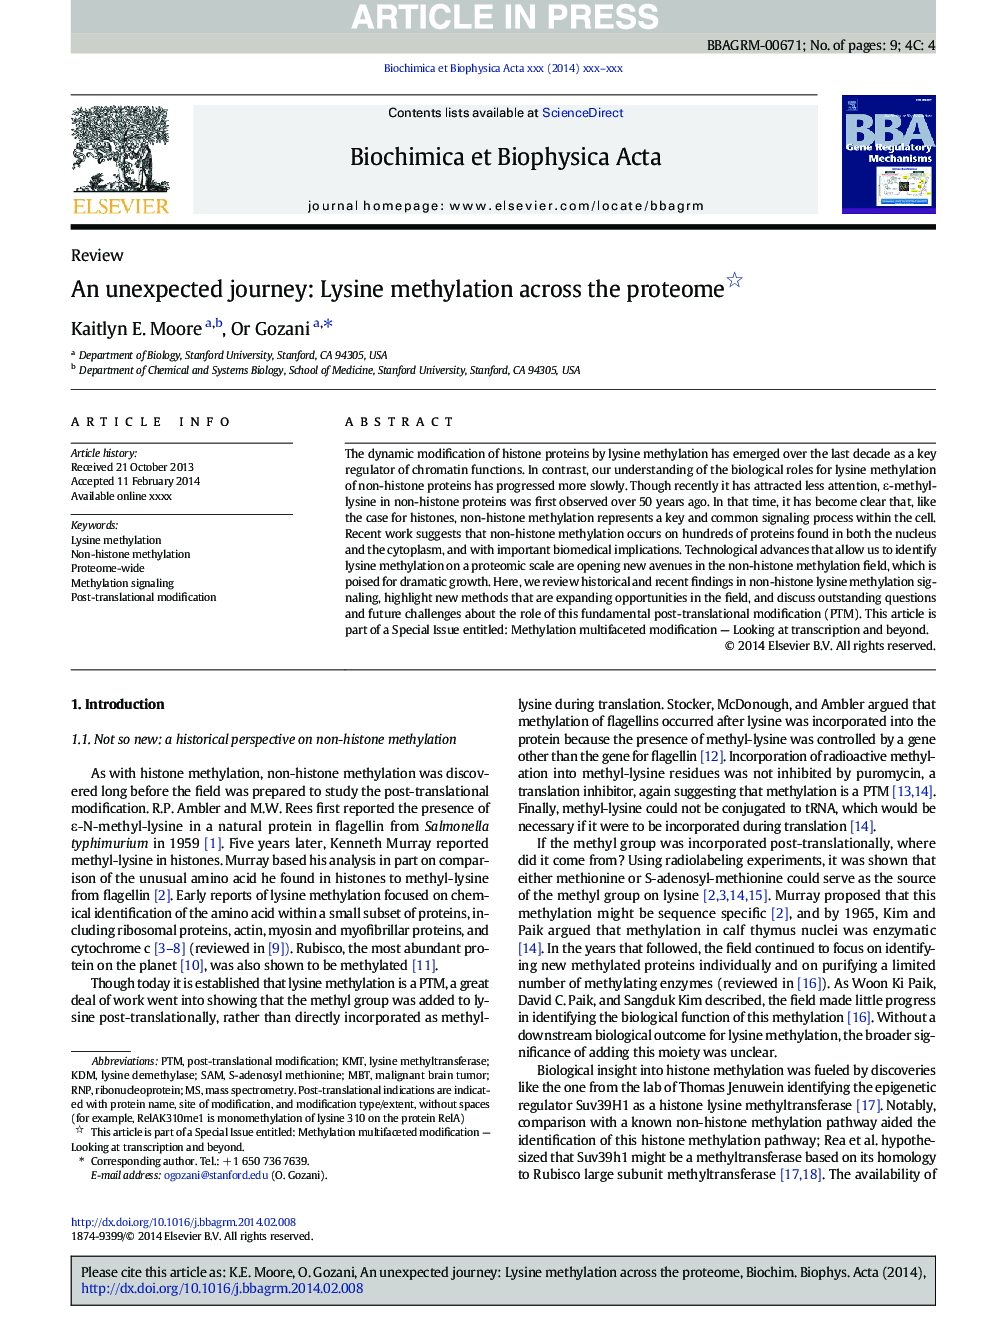 An unexpected journey: Lysine methylation across the proteome